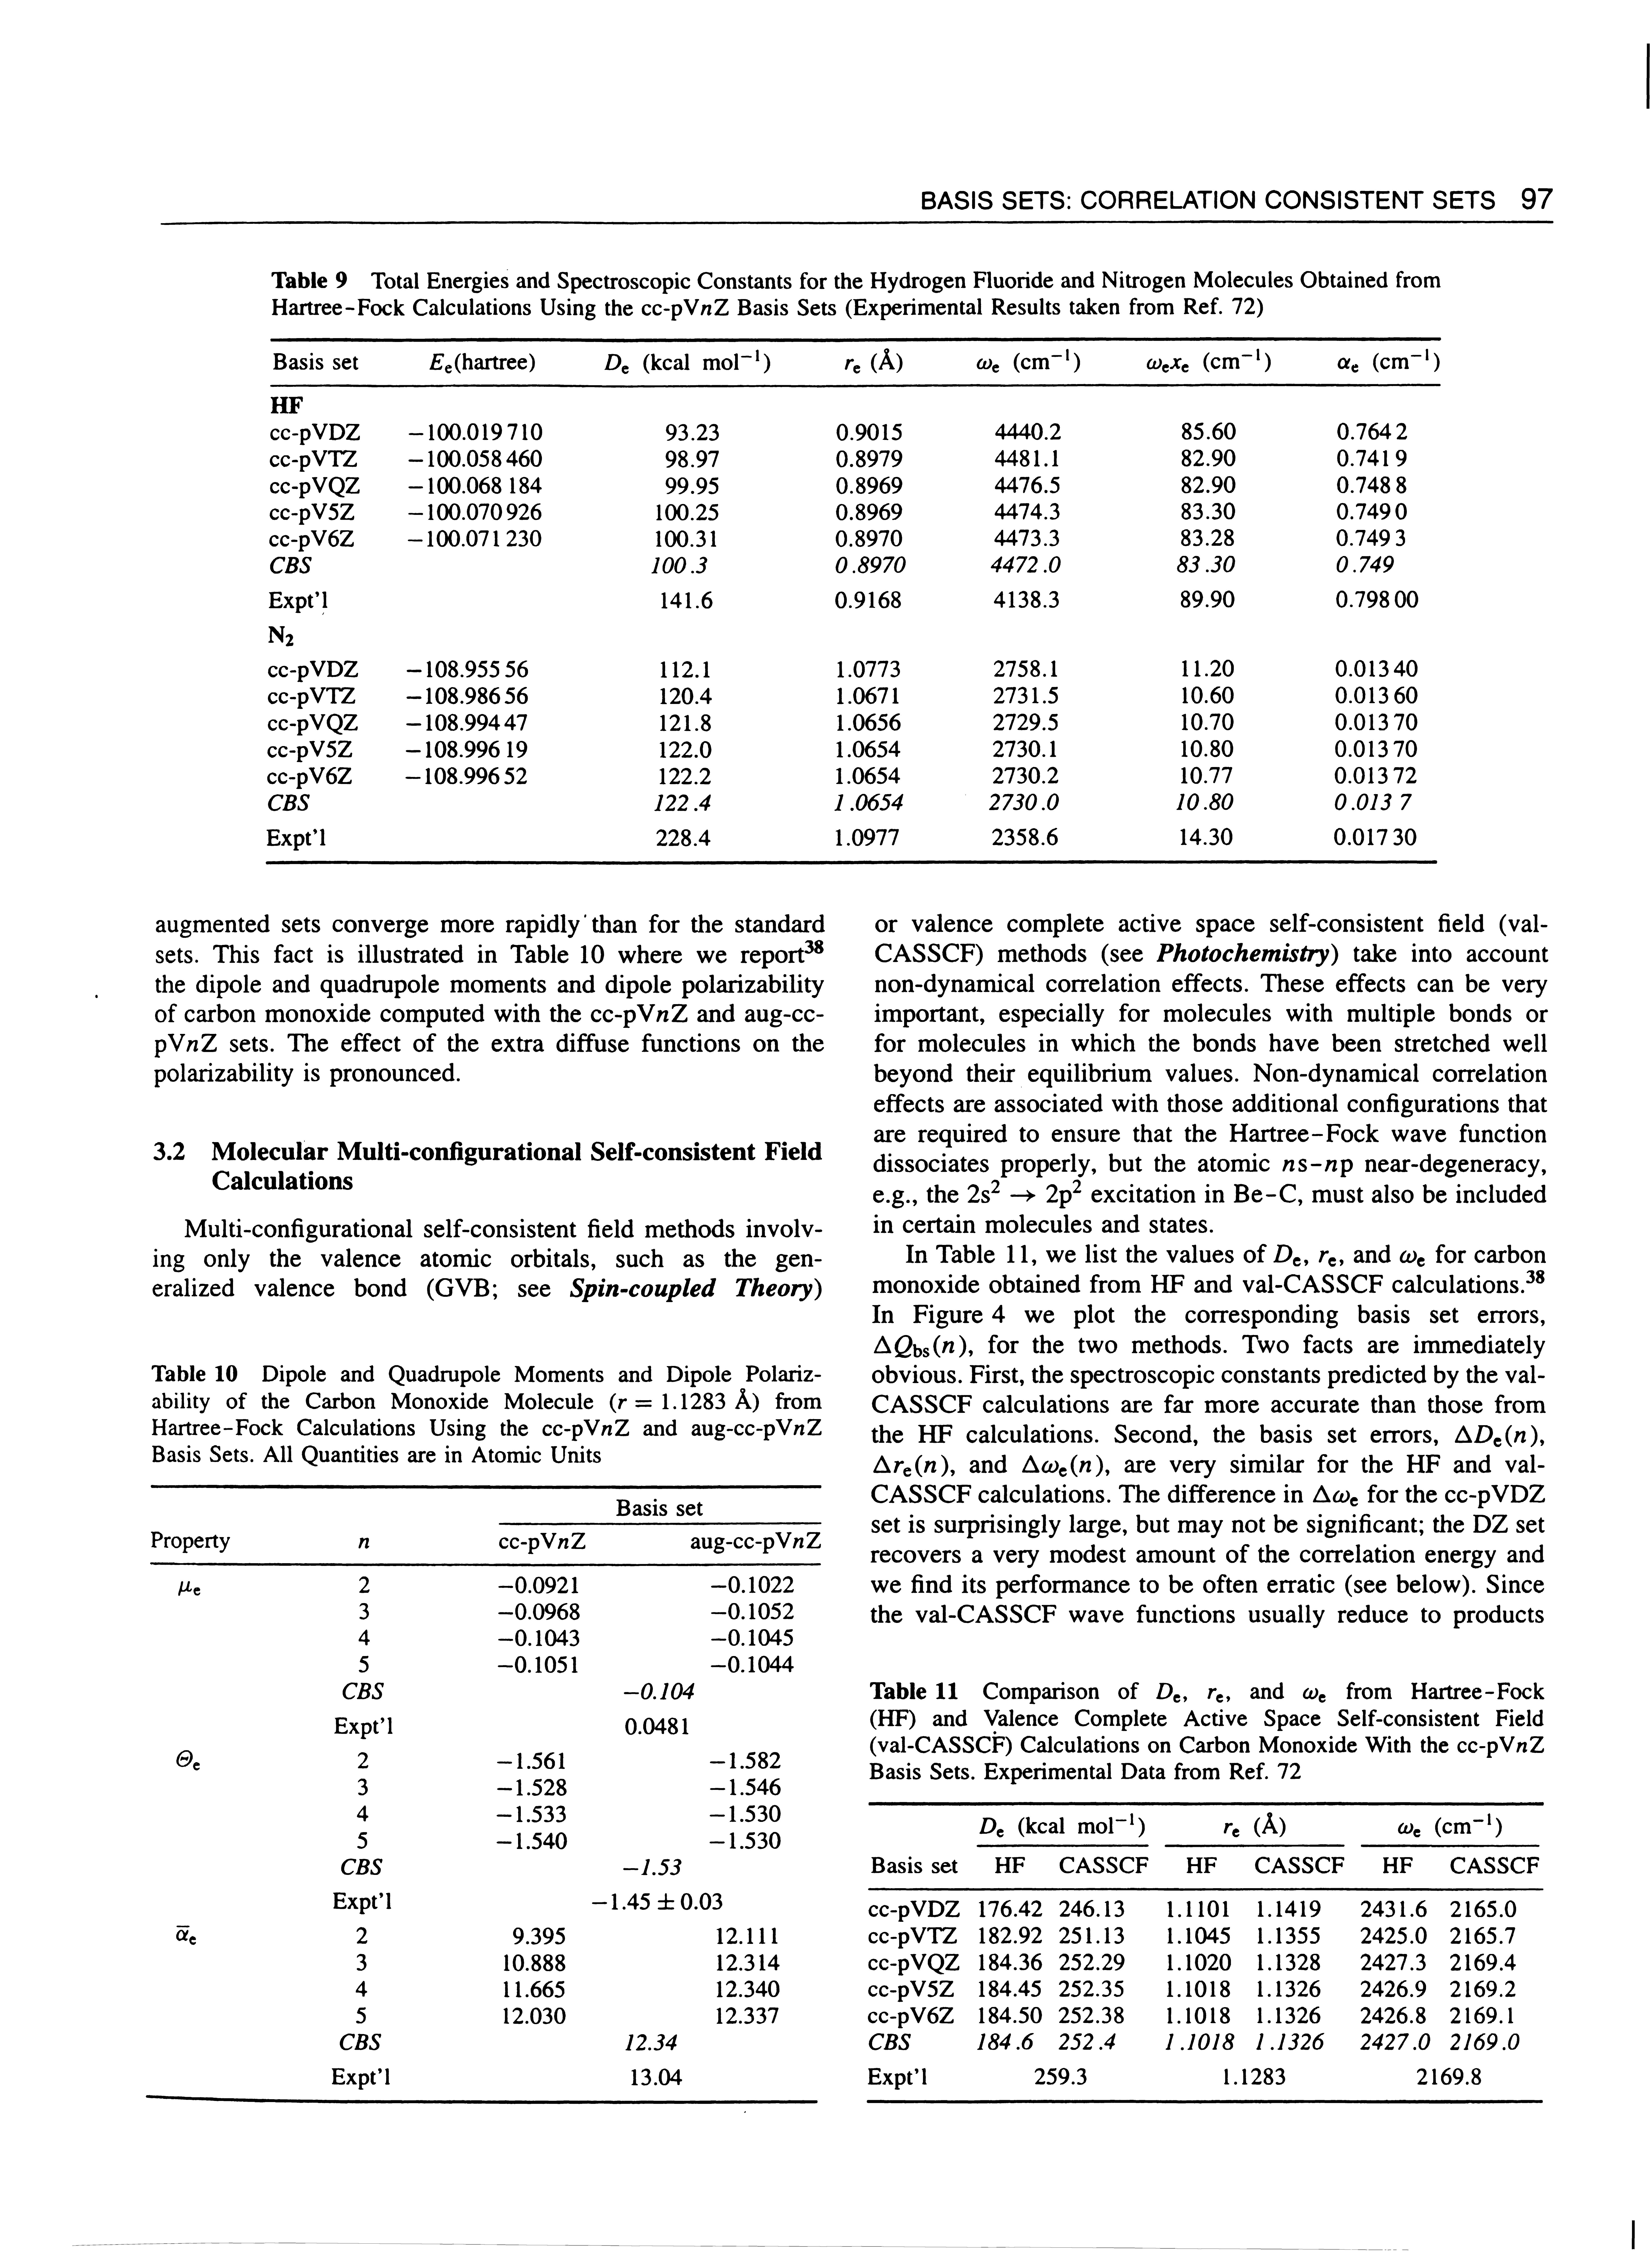 Table 9 Total Energies and Spectroscopic Constants for the Hydrogen Fluoride and Nitrogen Molecules Obtained from Hartree-Fock Calculations Using the cc-pVnZ Basis Sets (Experimental Results taken from Ref. 72)...